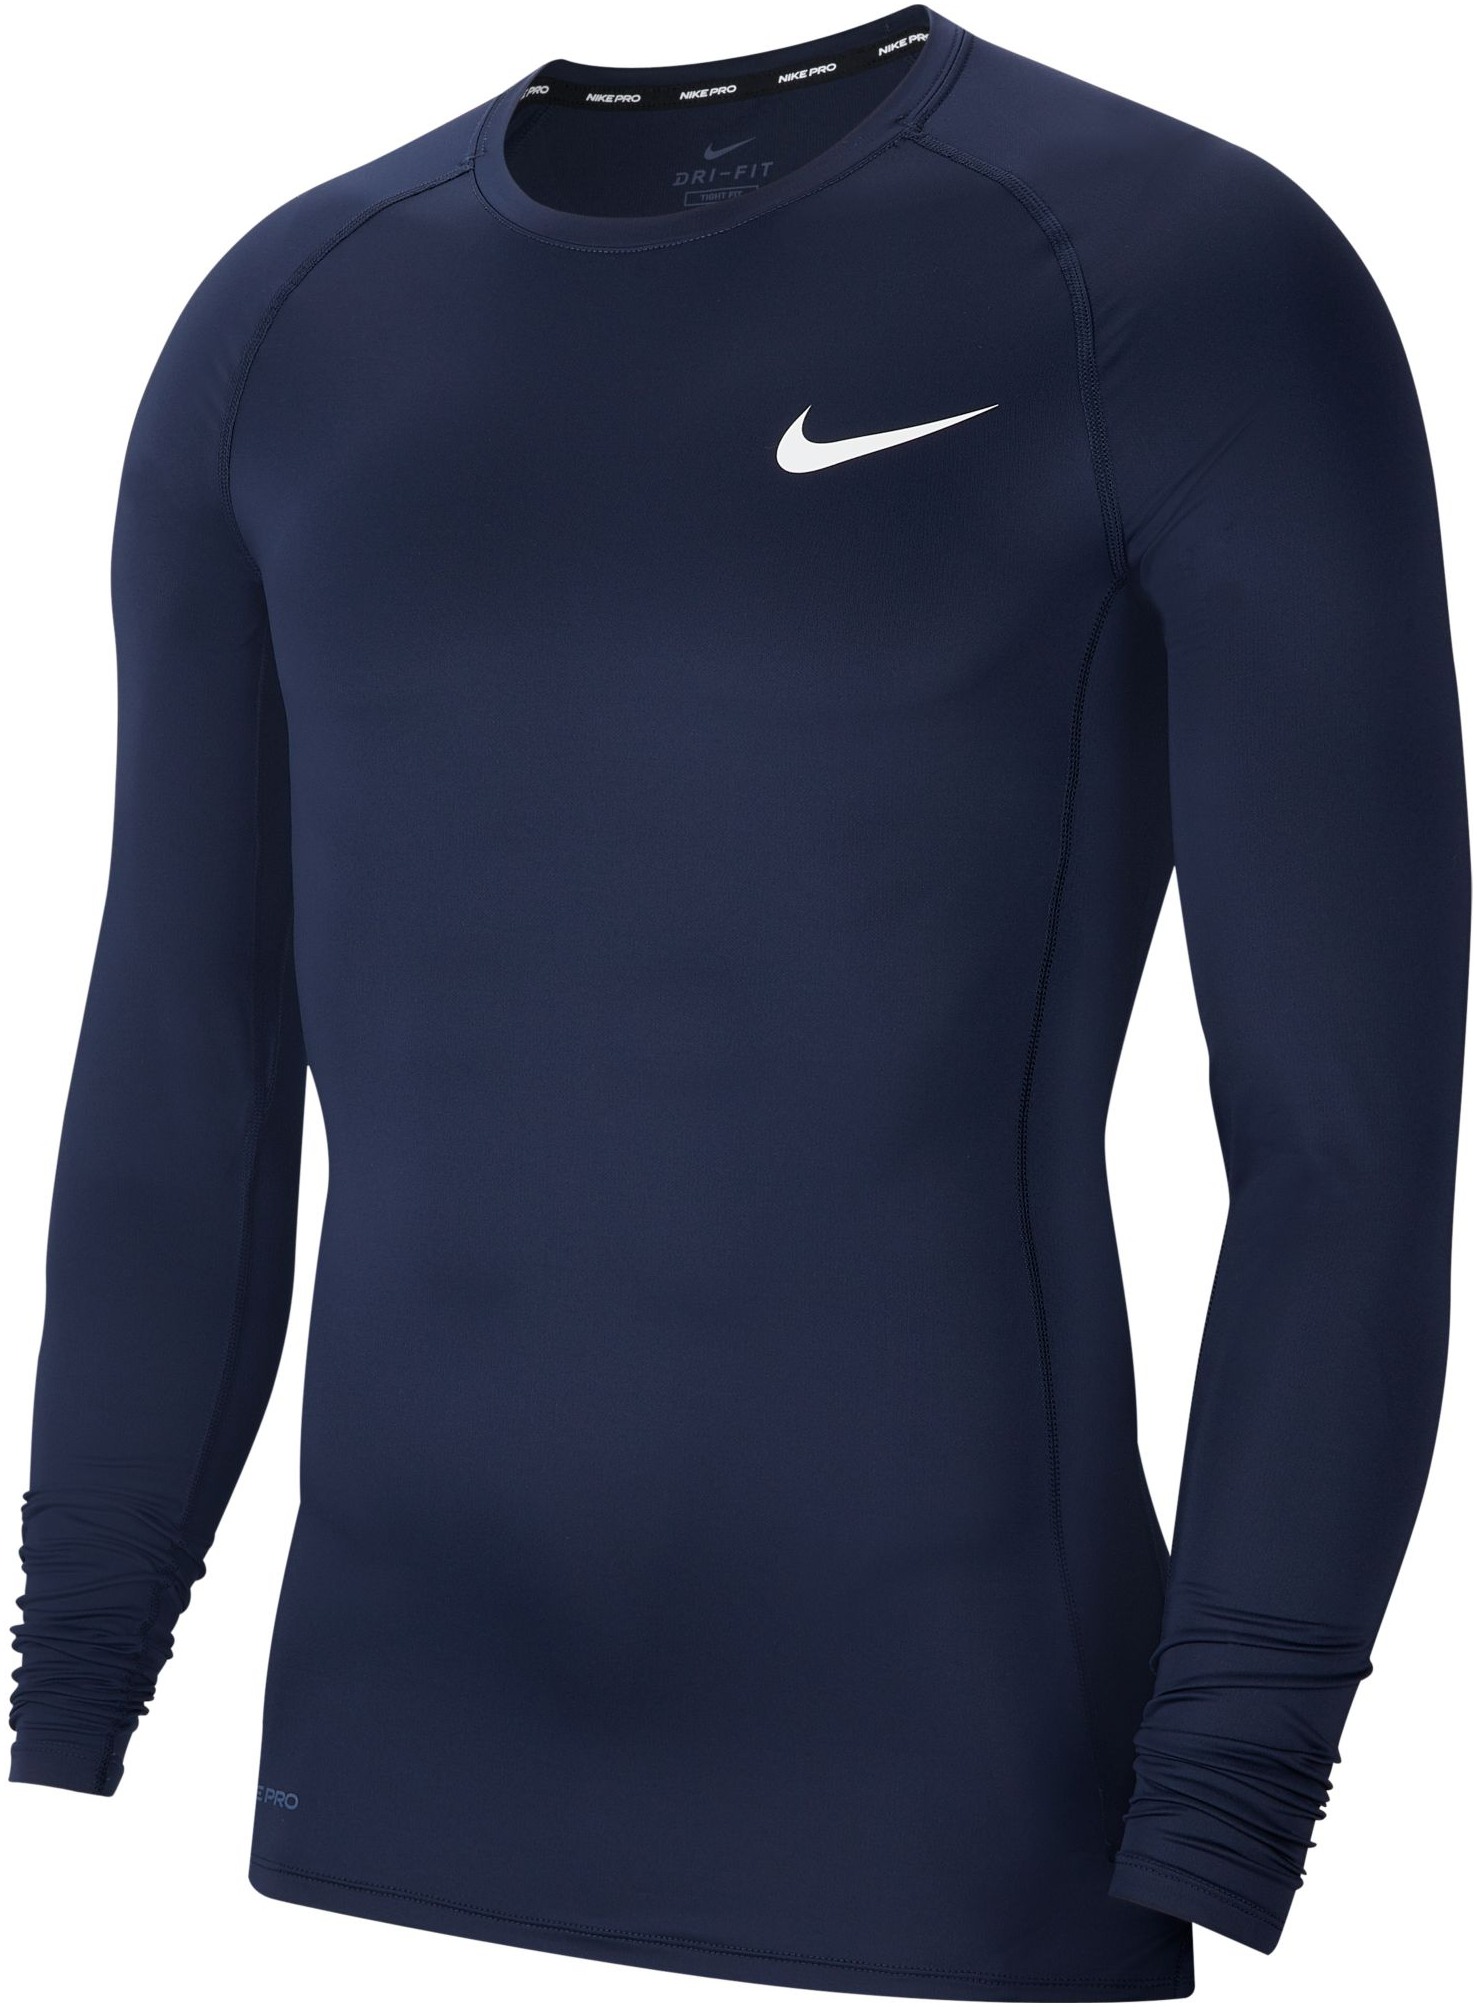 Mens compression long sleeve shirt Nike PRO blue | AD Sport.store